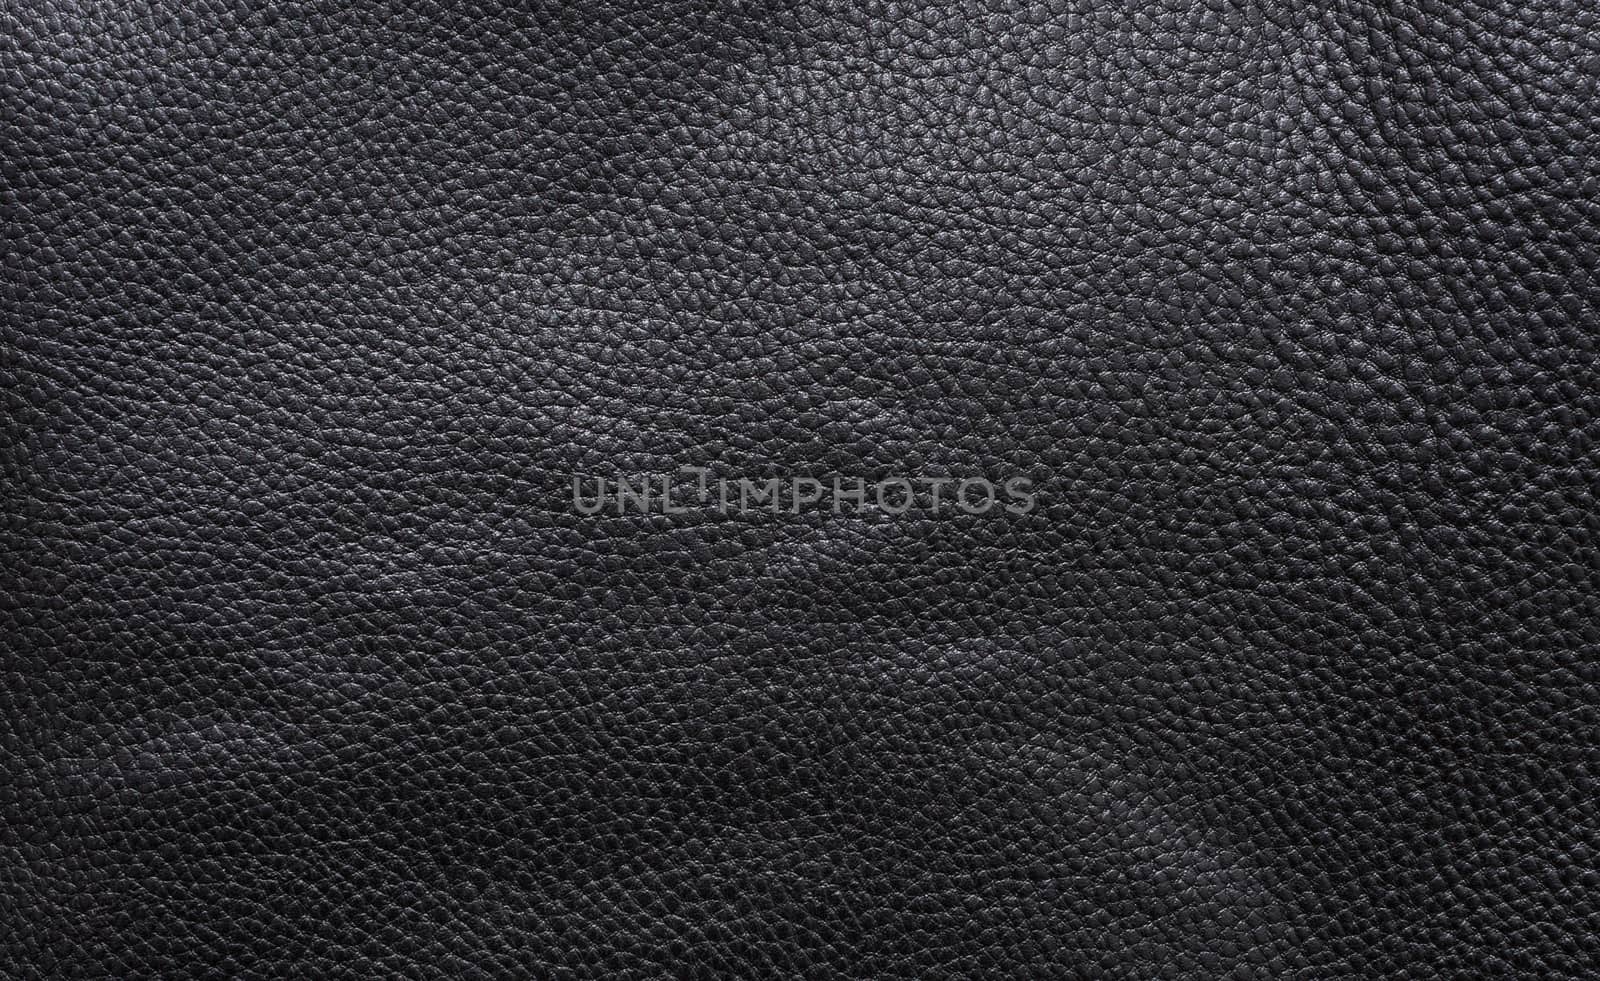 black leather texture for background